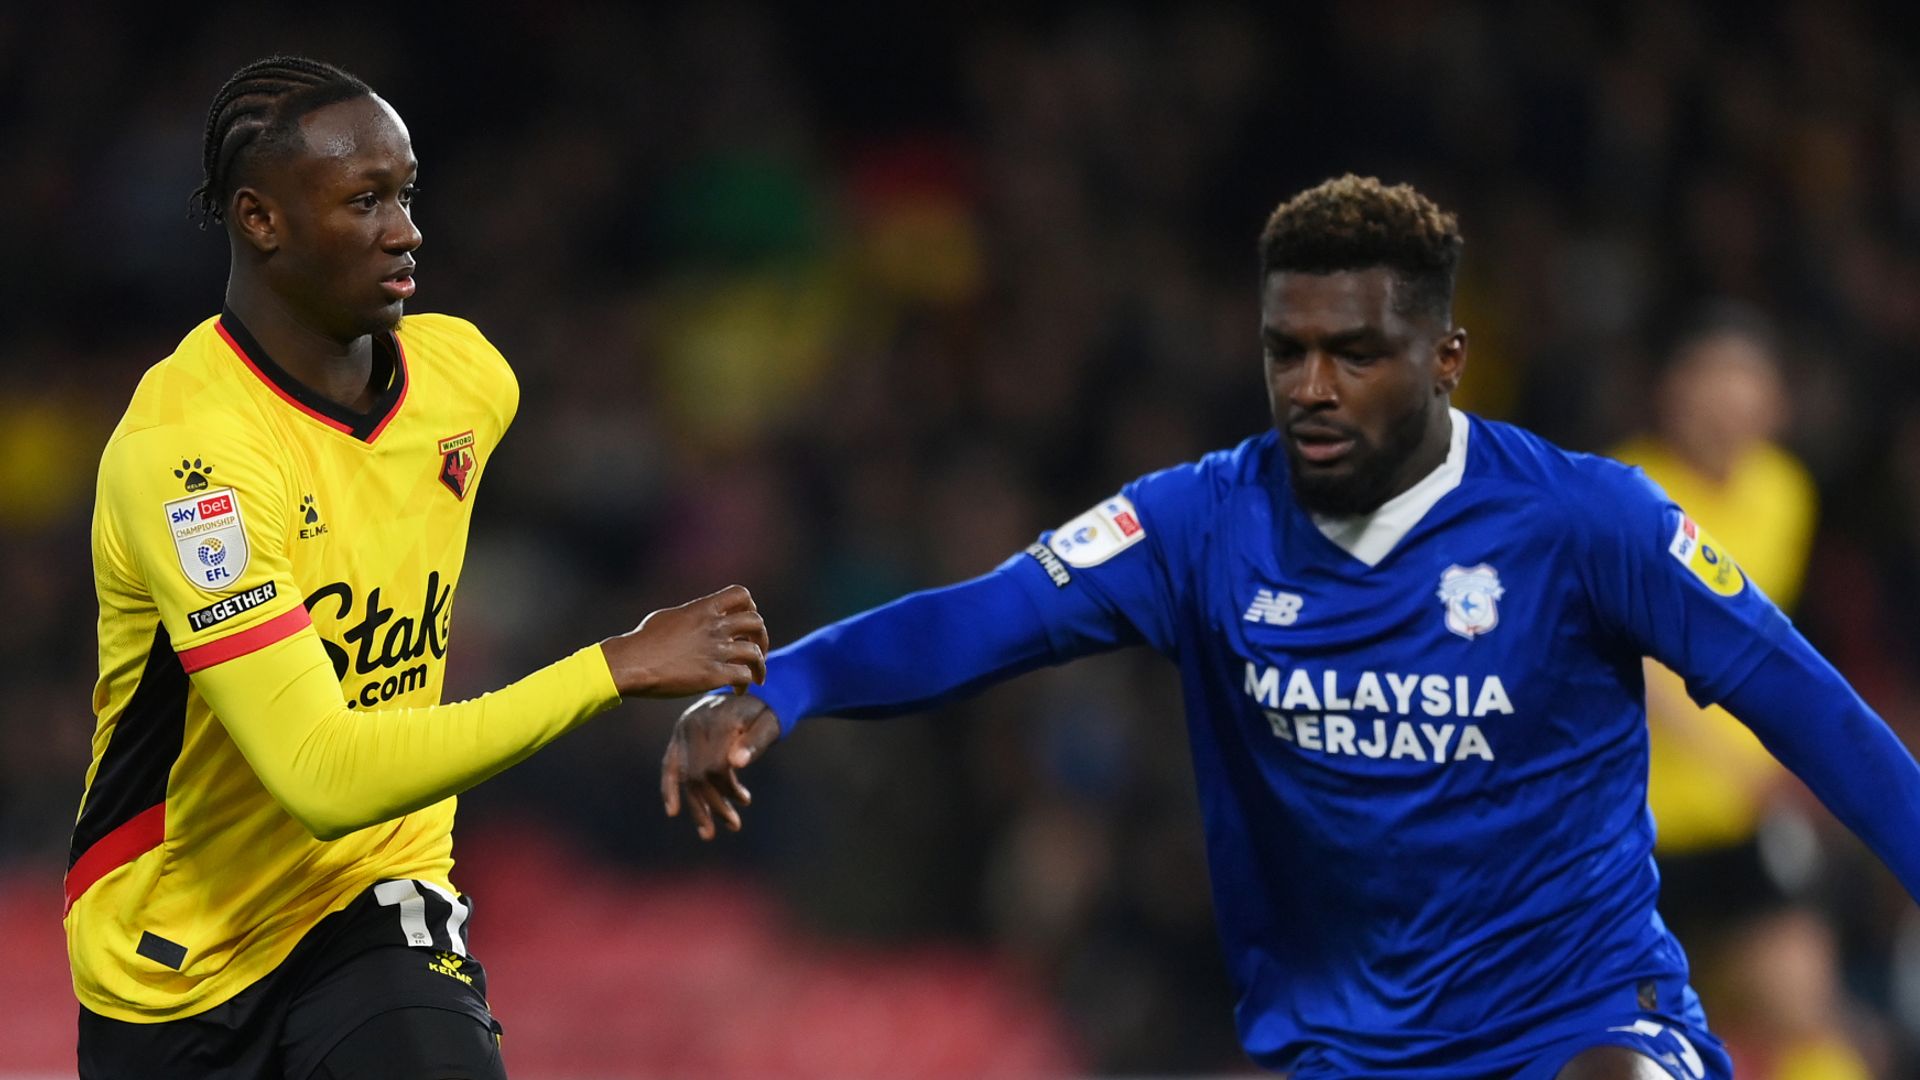 Cardiff alleviate fears of drop with win at Watford